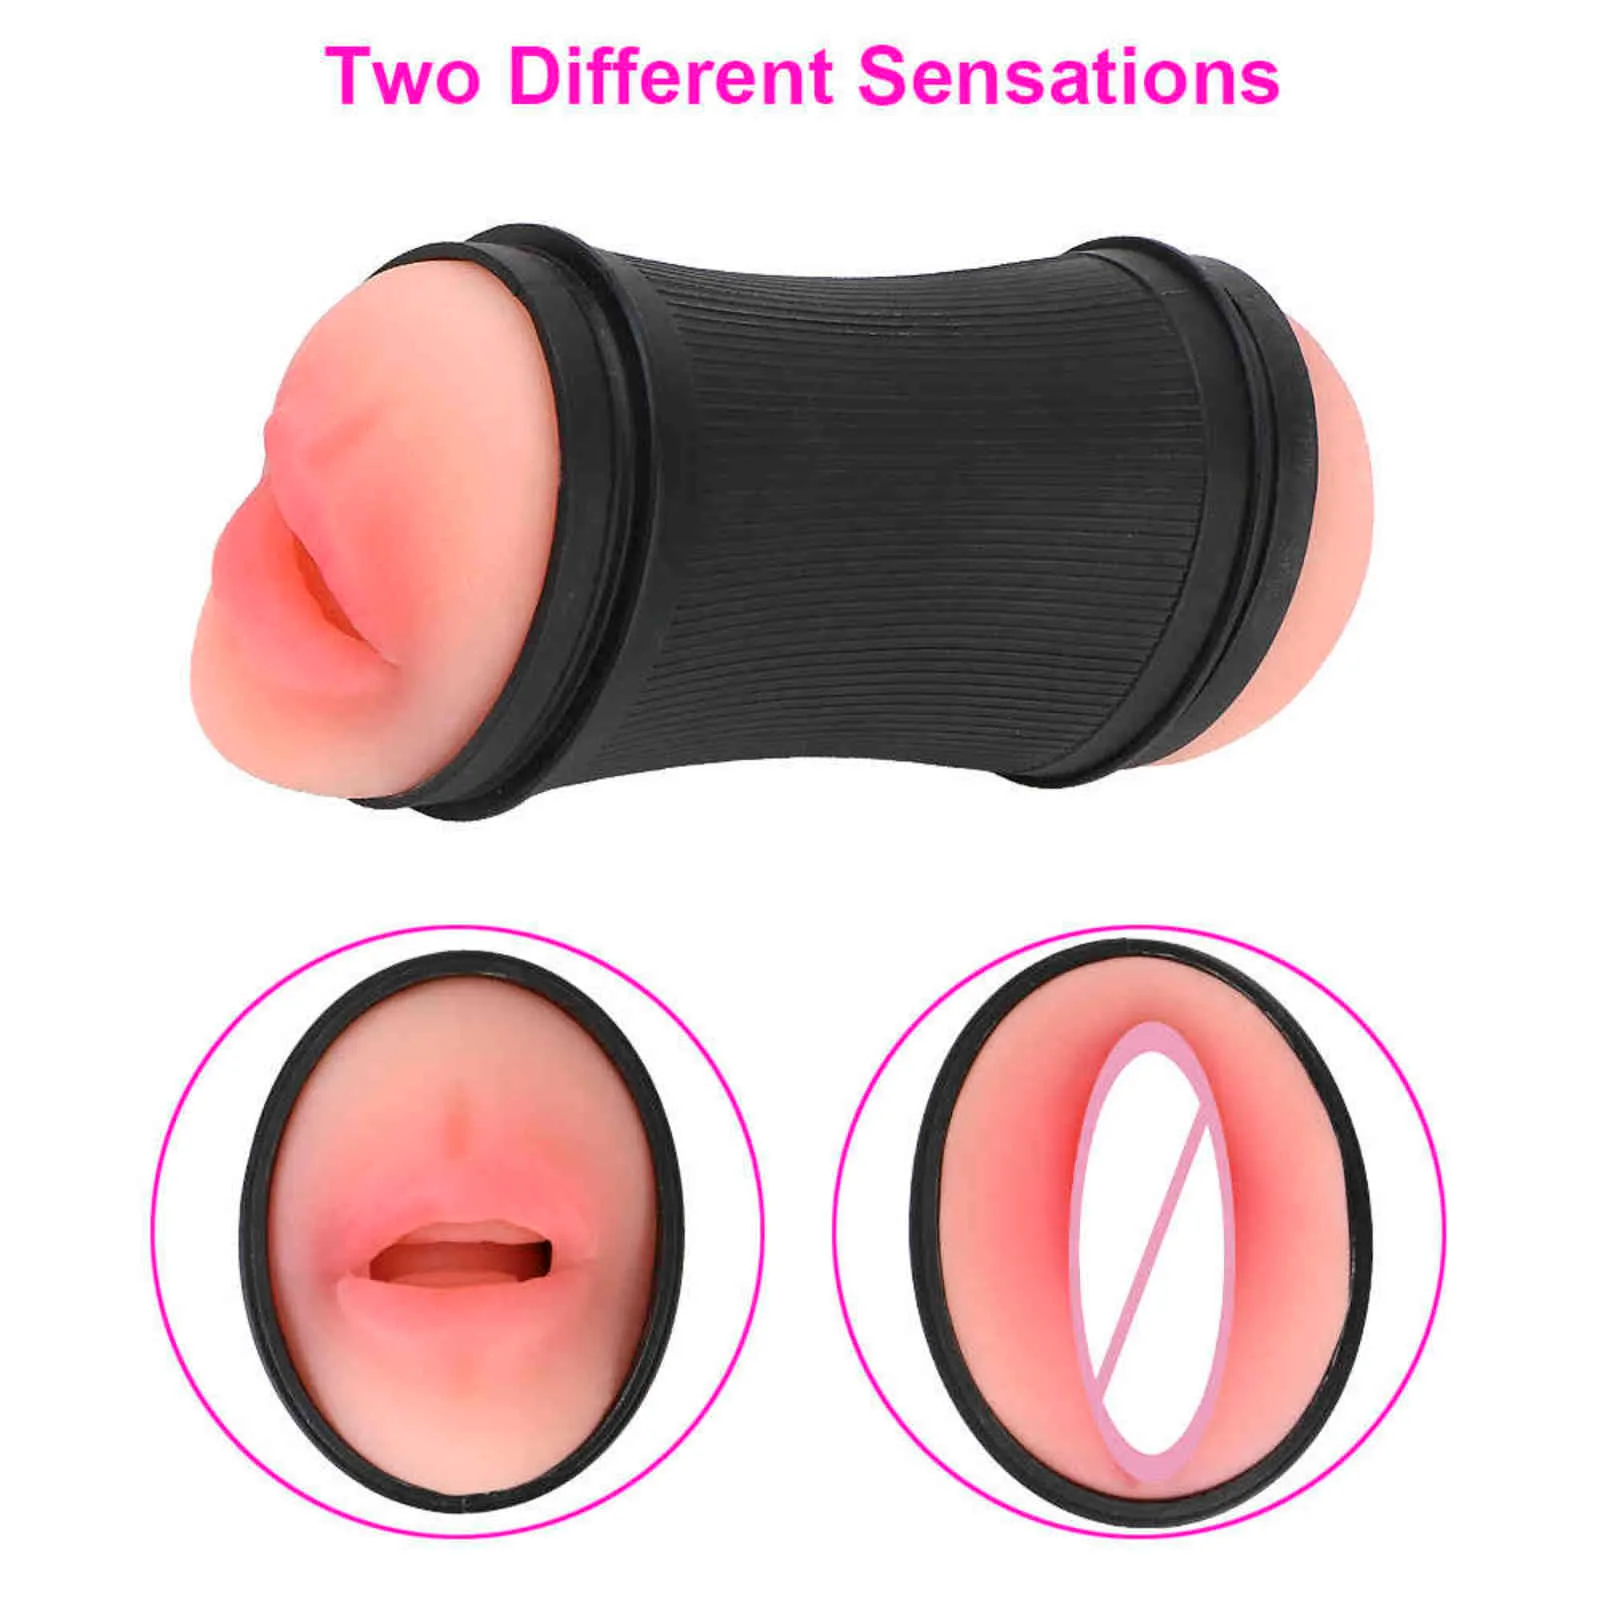 NXY Adult toys Real Flesh Buttocks Model Masturbator Male Masturbation Cup Vagina Pussy Rotation Sex Toys For Men With Strong Sucker 1201